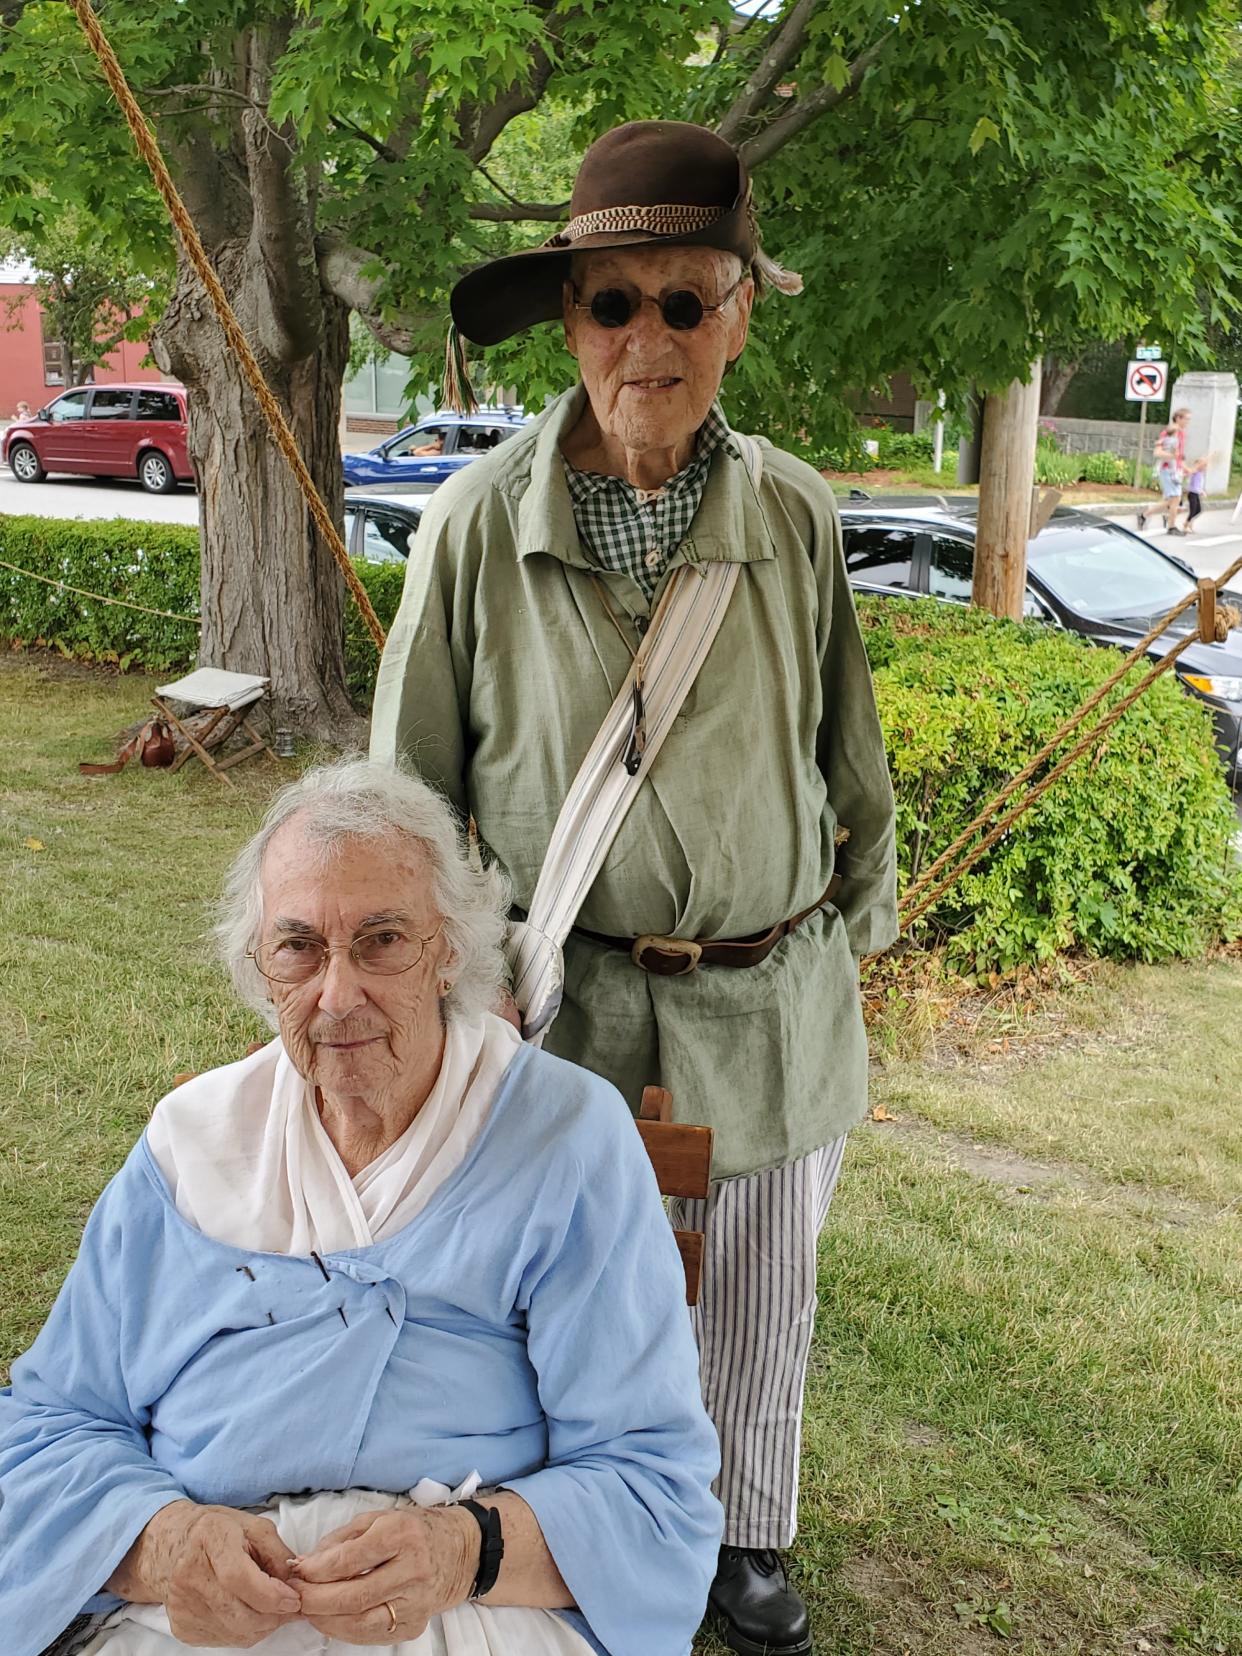 June and Carroll White of Merrimack have been part of the First New Hampshire Regiment since it started in 1972. They're seen here during the American Independence Festival in Exeter Saturday, June 16, 2022.